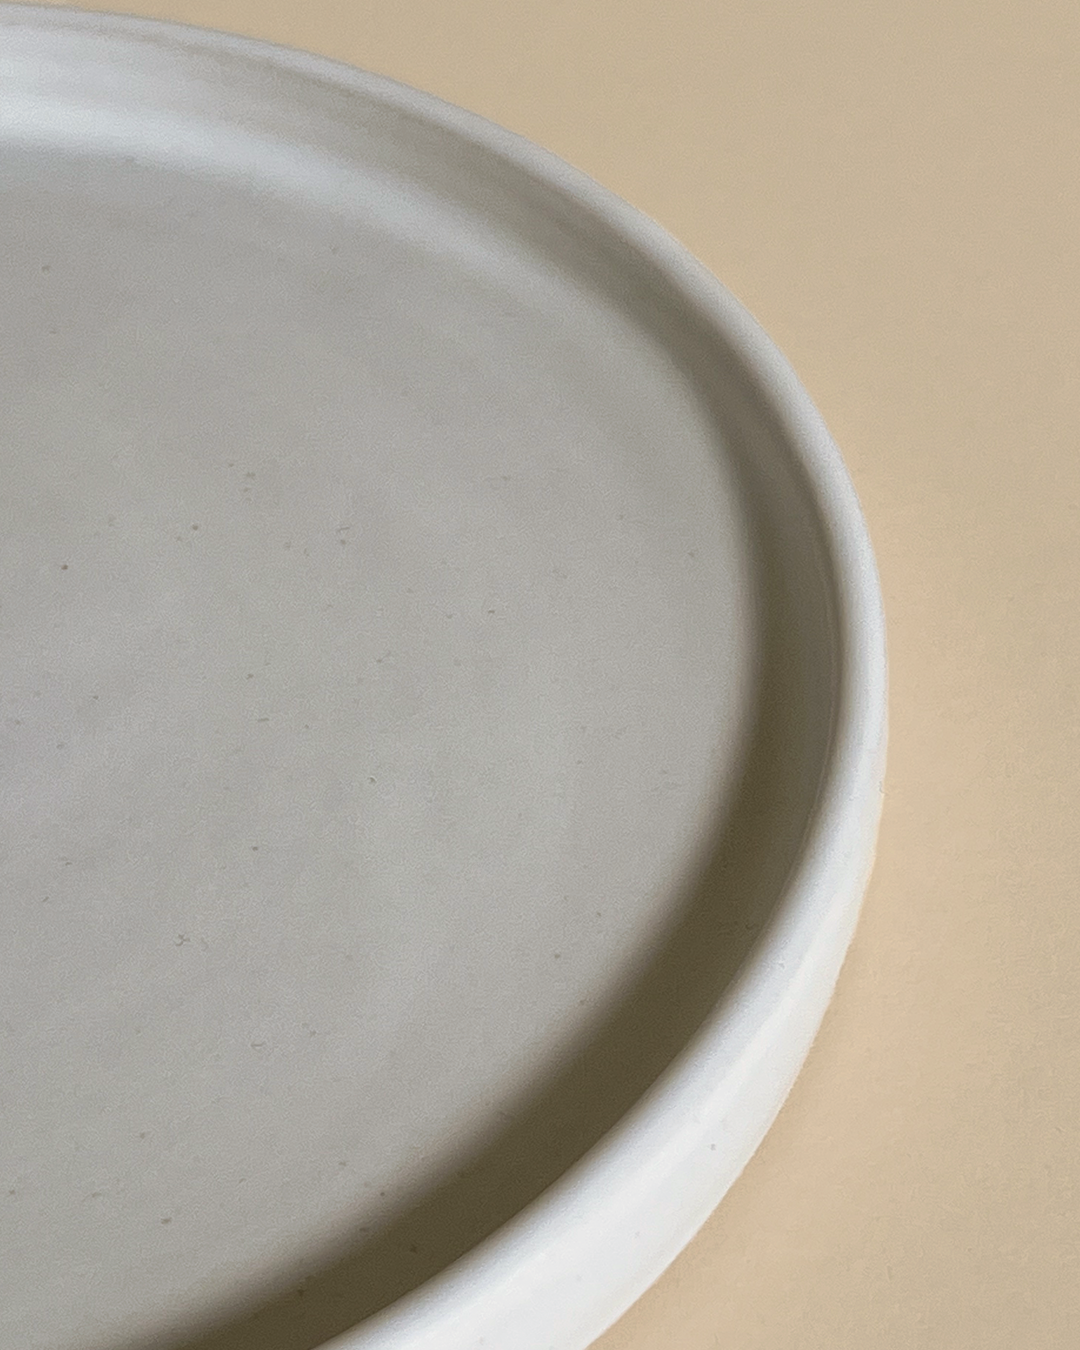 This limited edition handmade ceramic plate by Studio à La Cave x Clayeria is with it’s smaller size the perfect dish for a cozy breakfast or apéro gatherings. The fresh and creamy pastel colors make the collection a real eye-catcher.